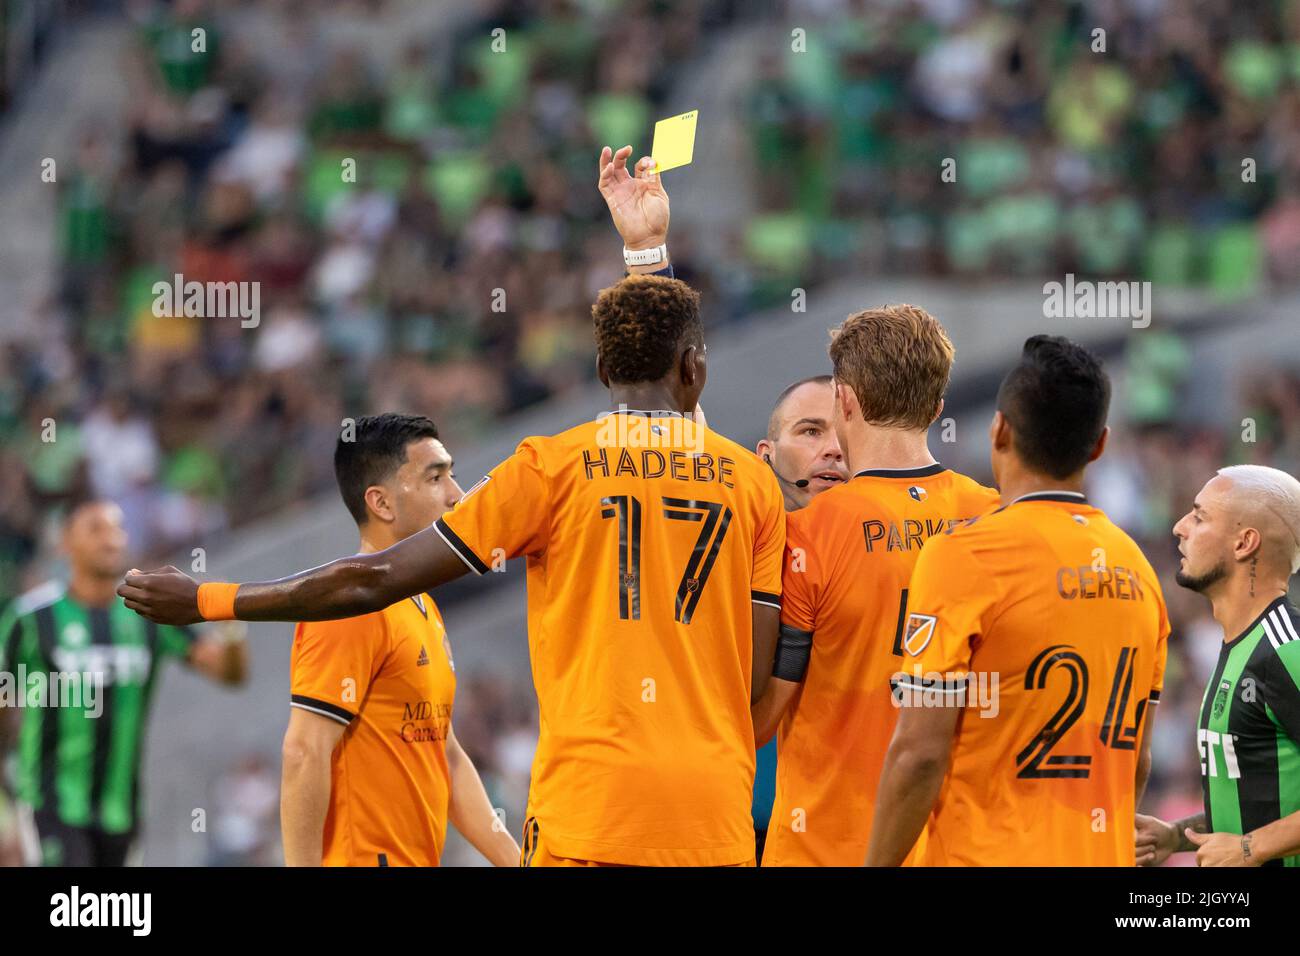 AUSTIN, TX - JULY 12: Houston Dynamo defender Teenage Hadebe (17) receives  a yellow card during the first half of the MLS match between Austin FC and  Houston Dynamo on July 12,